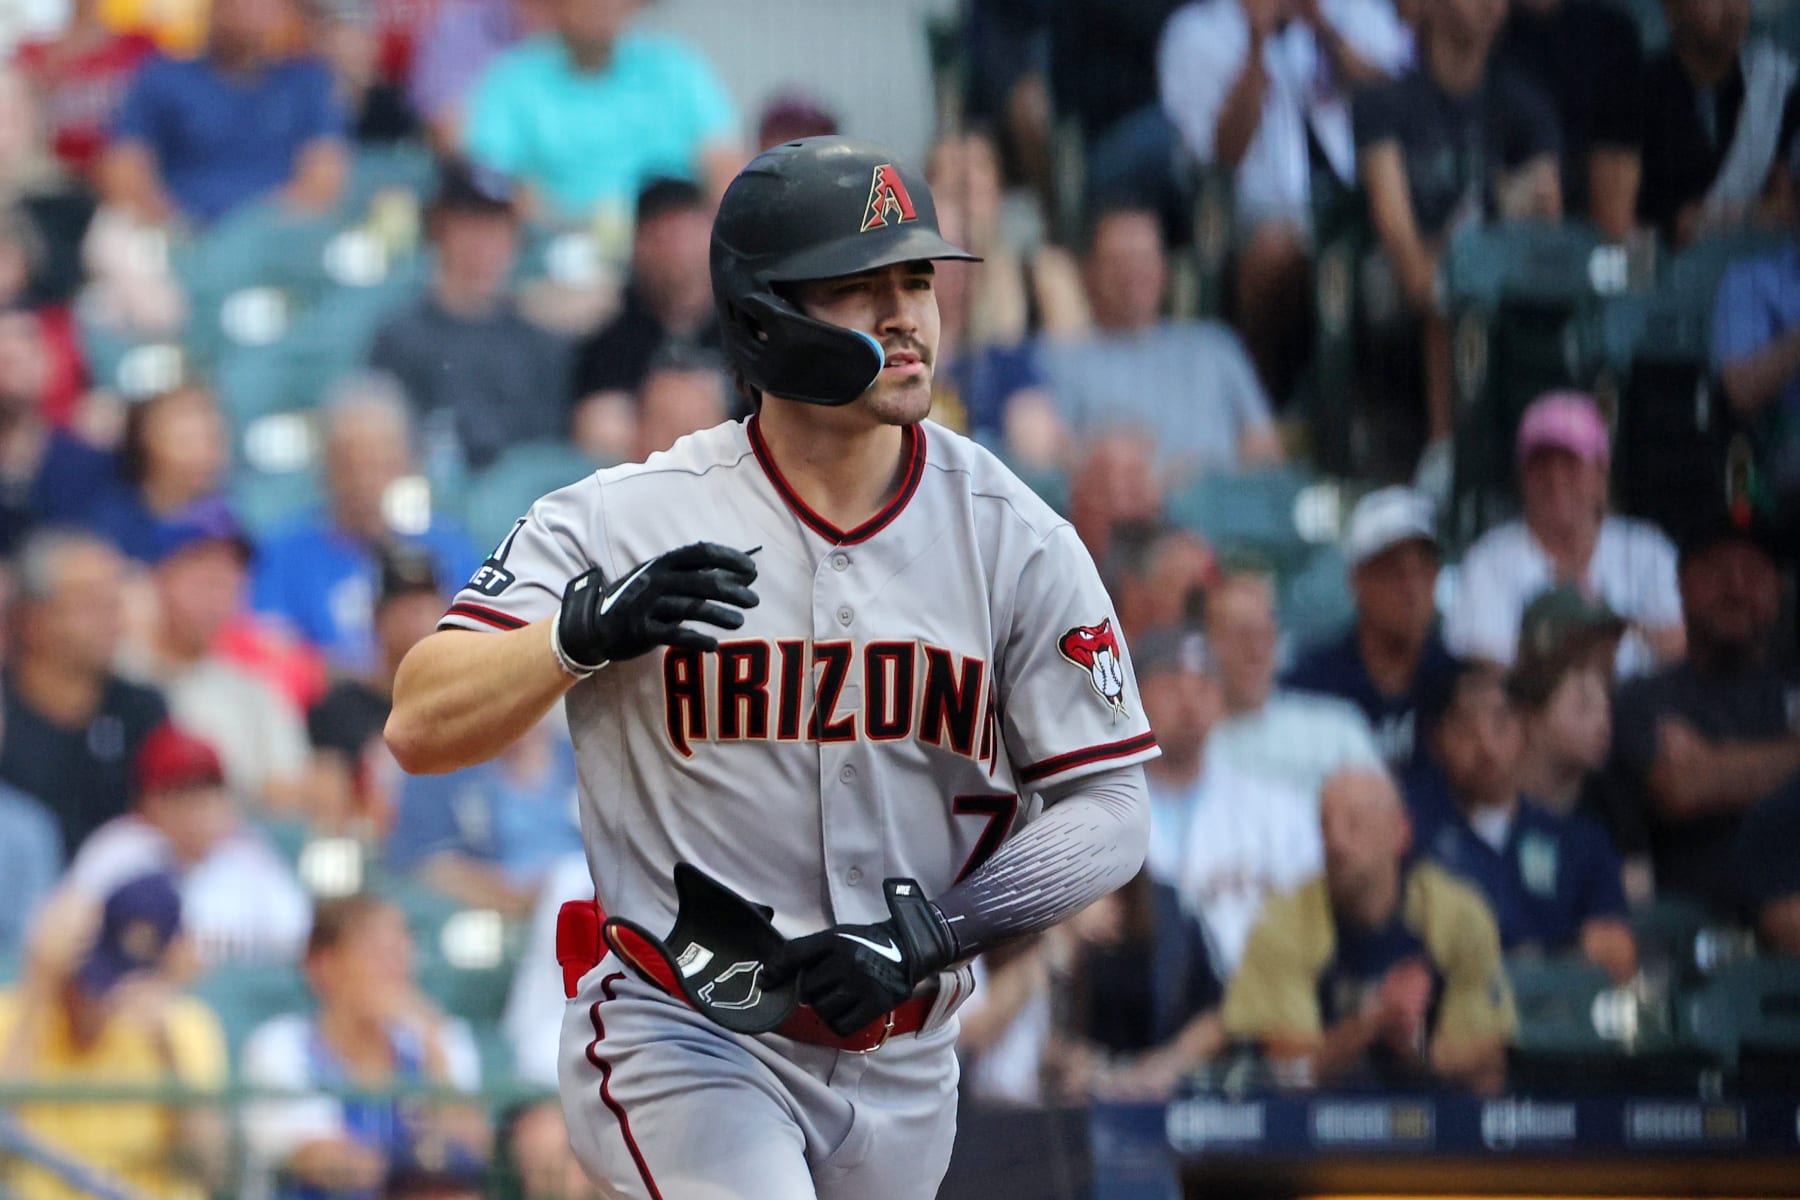 D-backs' Druw Jones described what it was like to face Shohei Ohtani